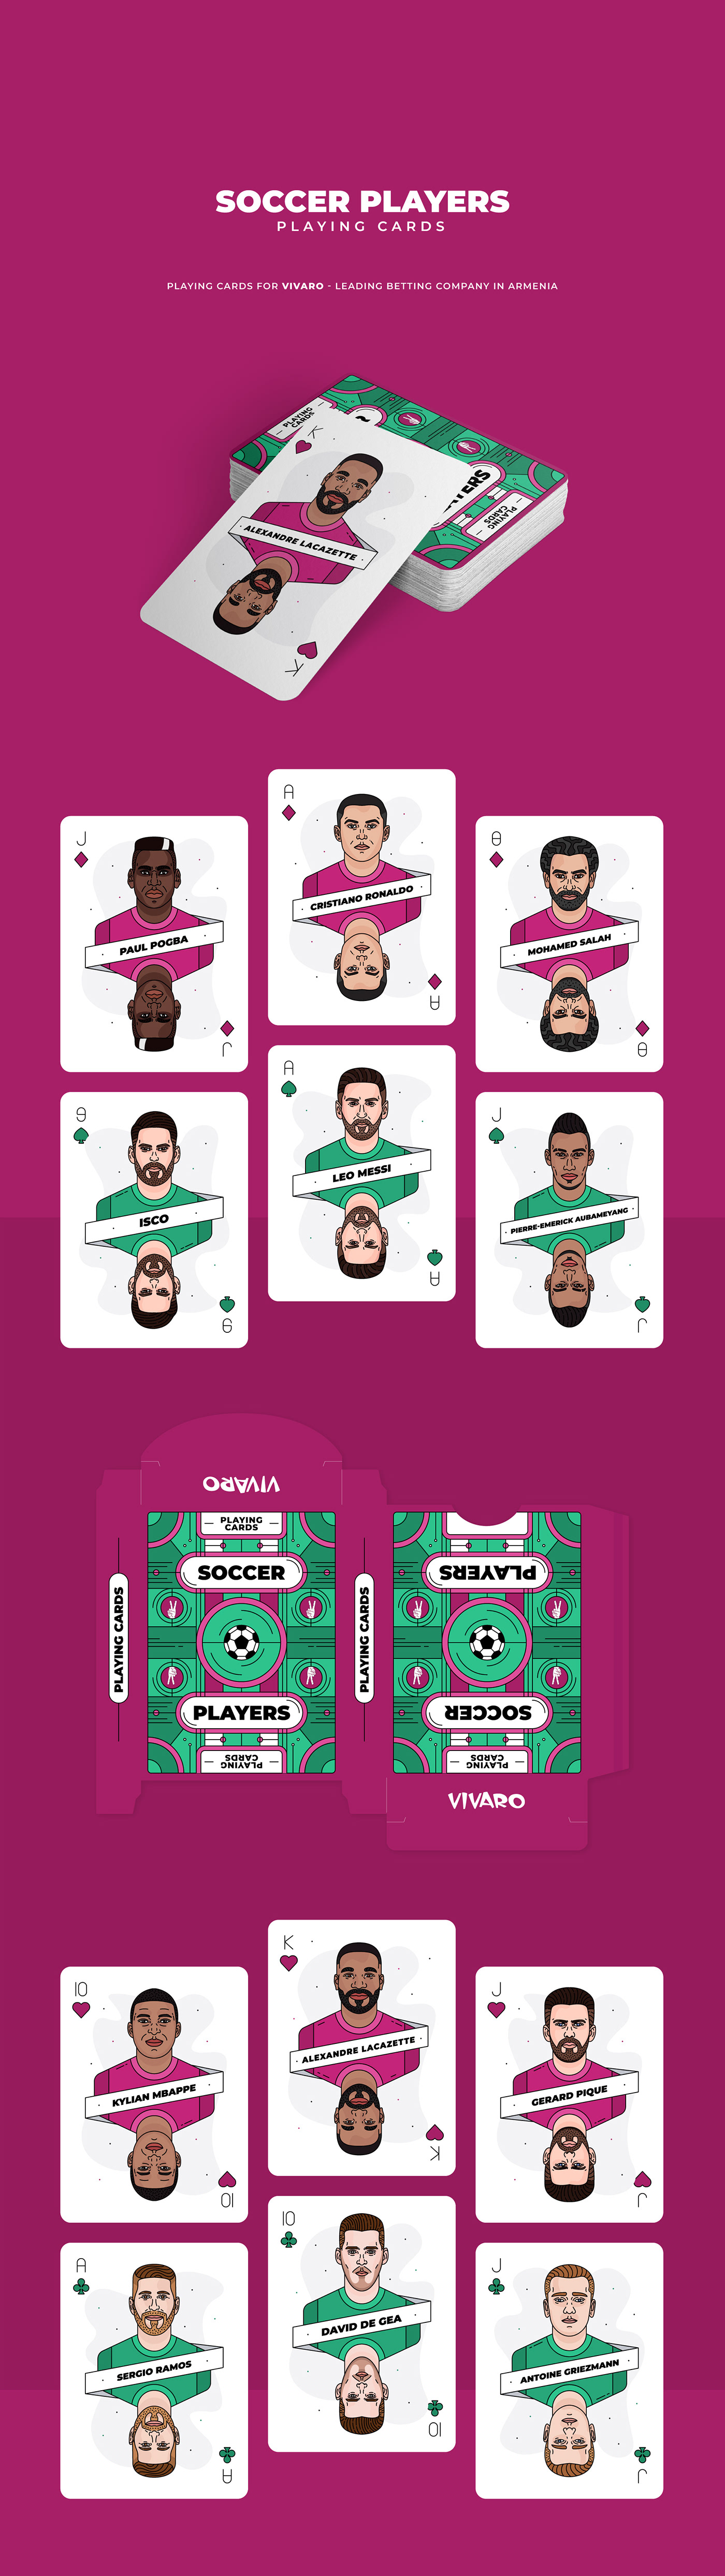 graphicdesign Soccerplayers football ILLUSTRATION  messi Ronaldo mbappe Playing Cards soccer